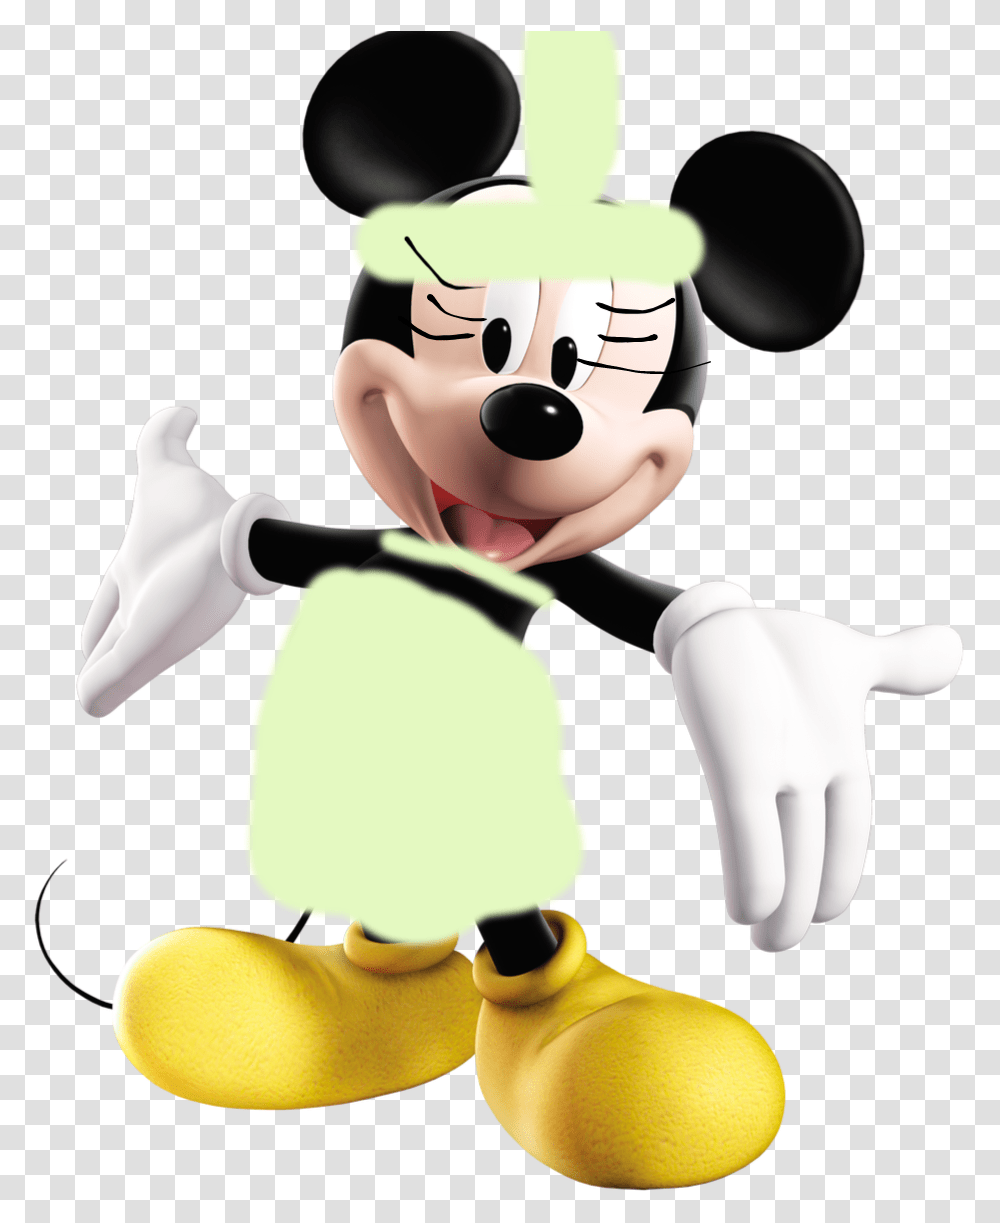 Mickey Mouse 3d Profile Mickey Mouse Whatsapp Dp, Toy, Performer, Figurine, Super Mario Transparent Png